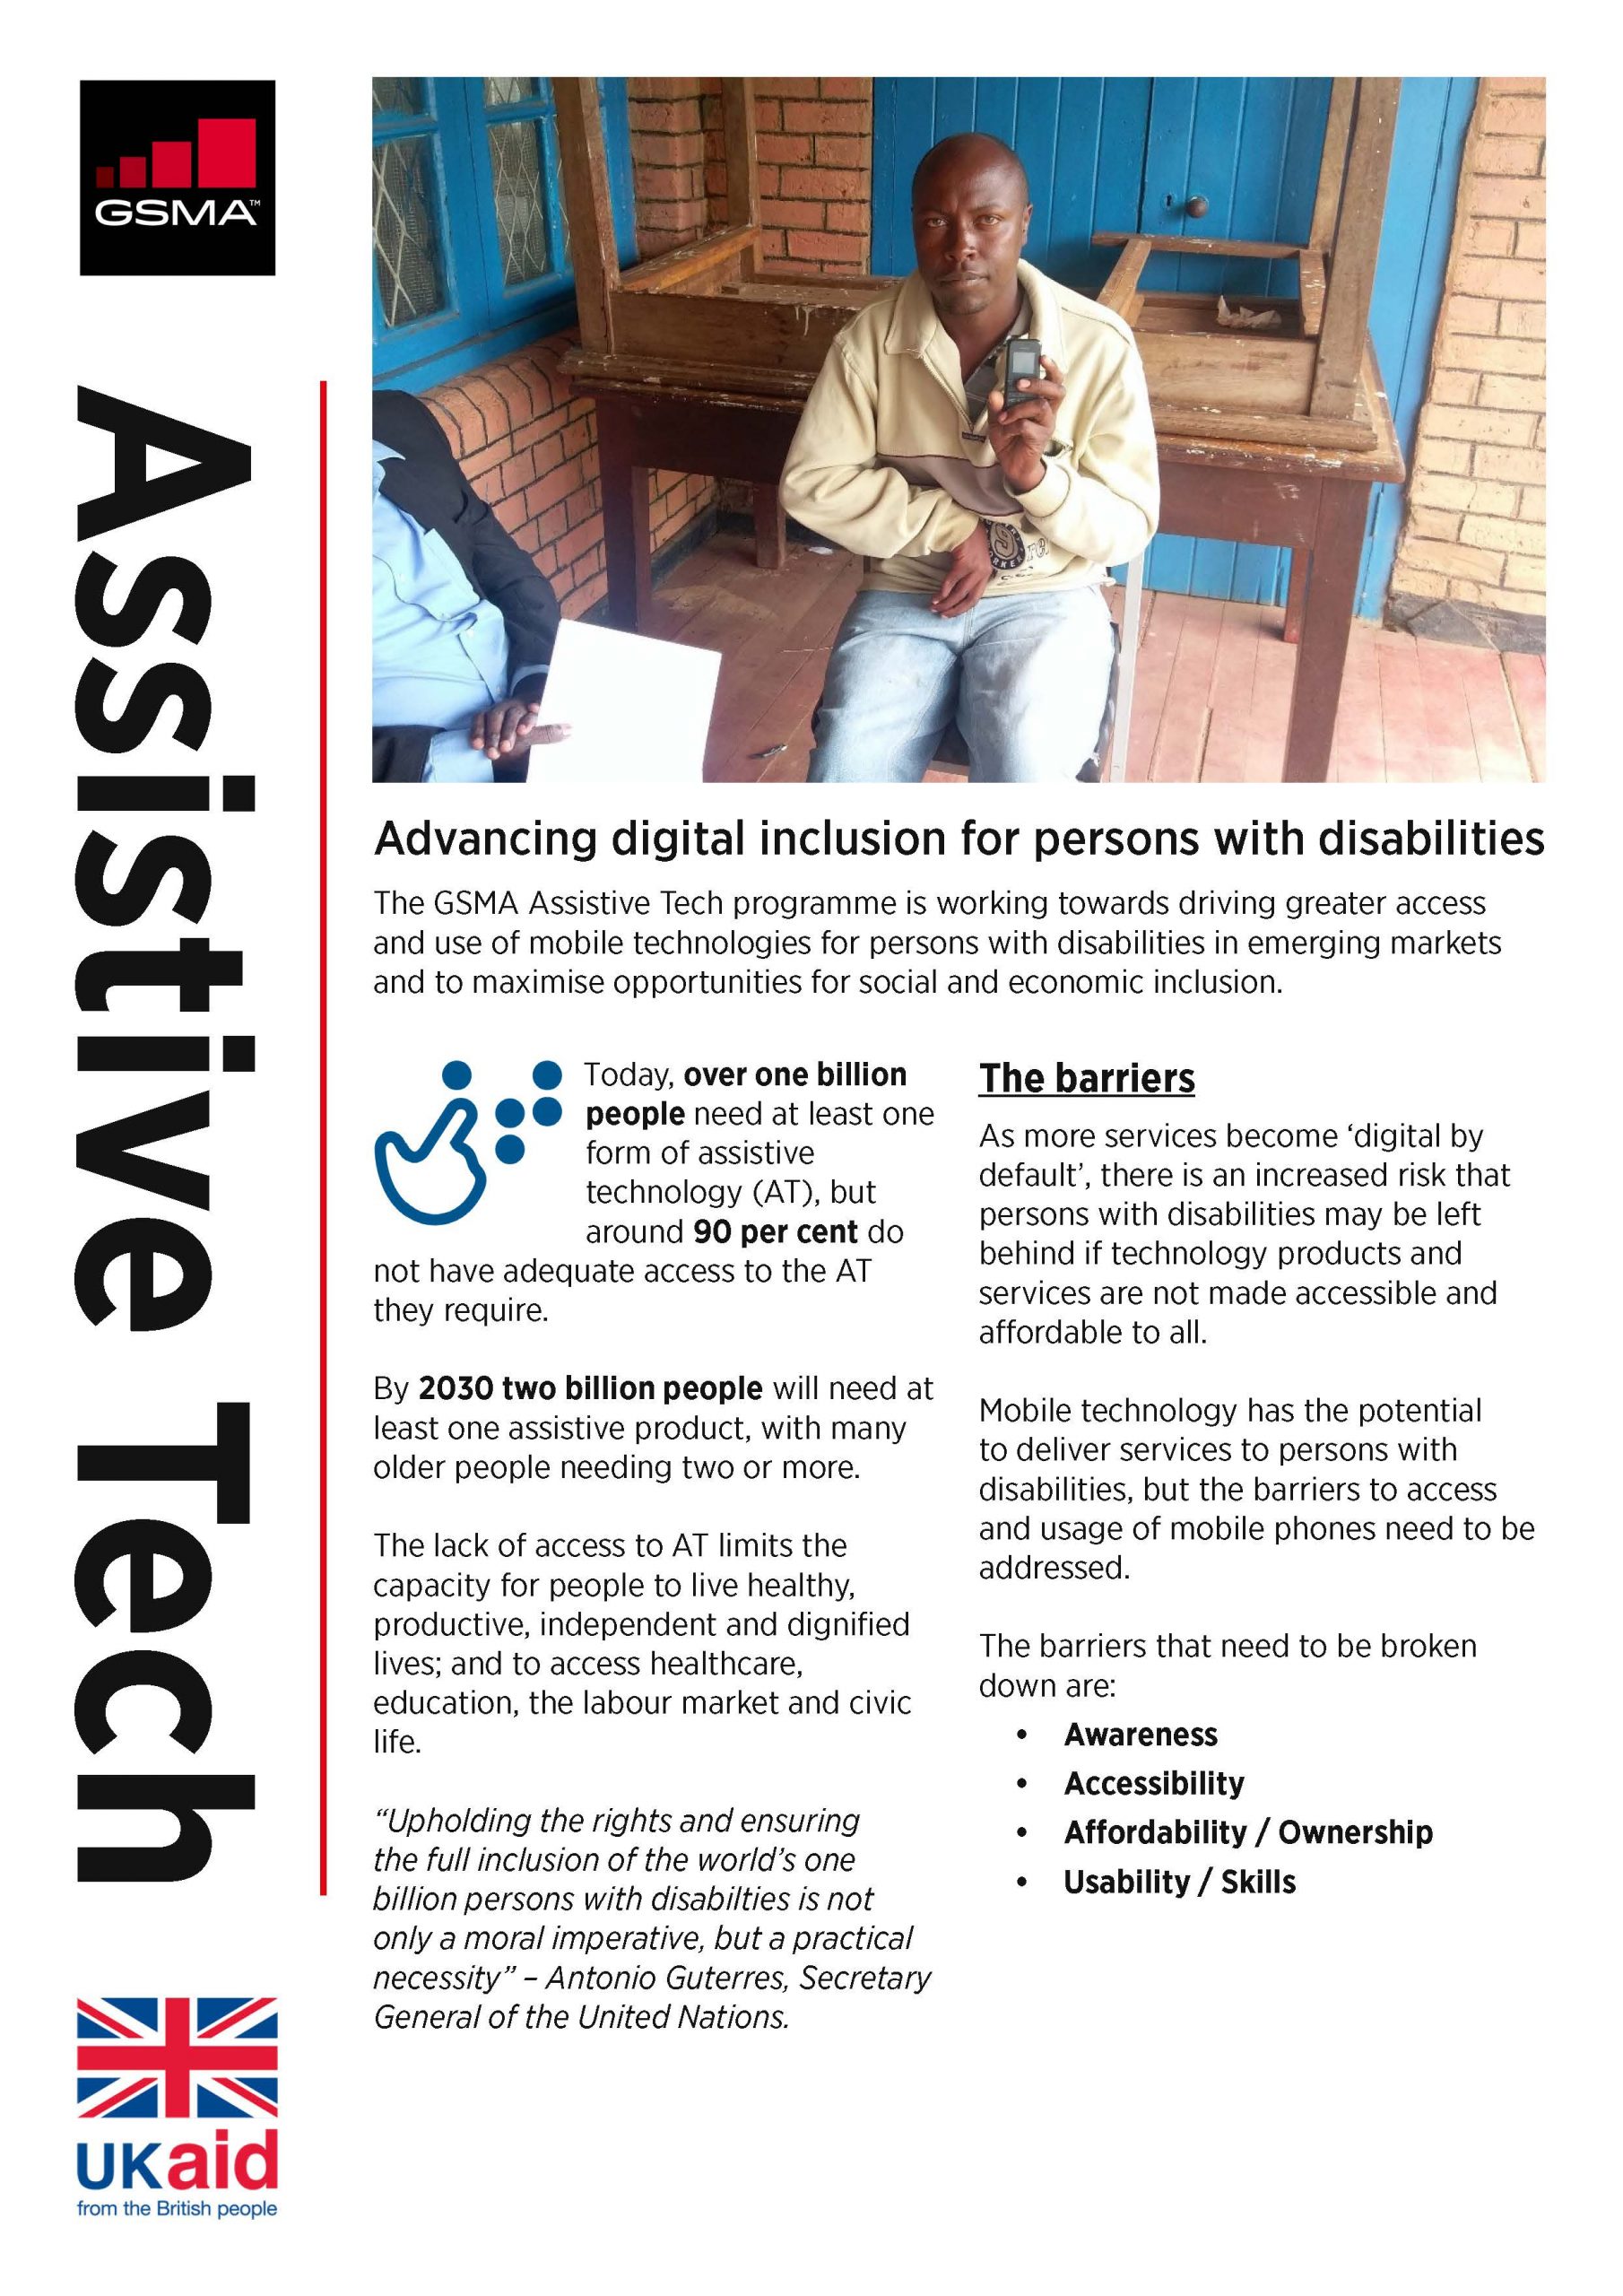 Advancing digital inclusion for persons with disabilities: About the Assistive Tech programme image